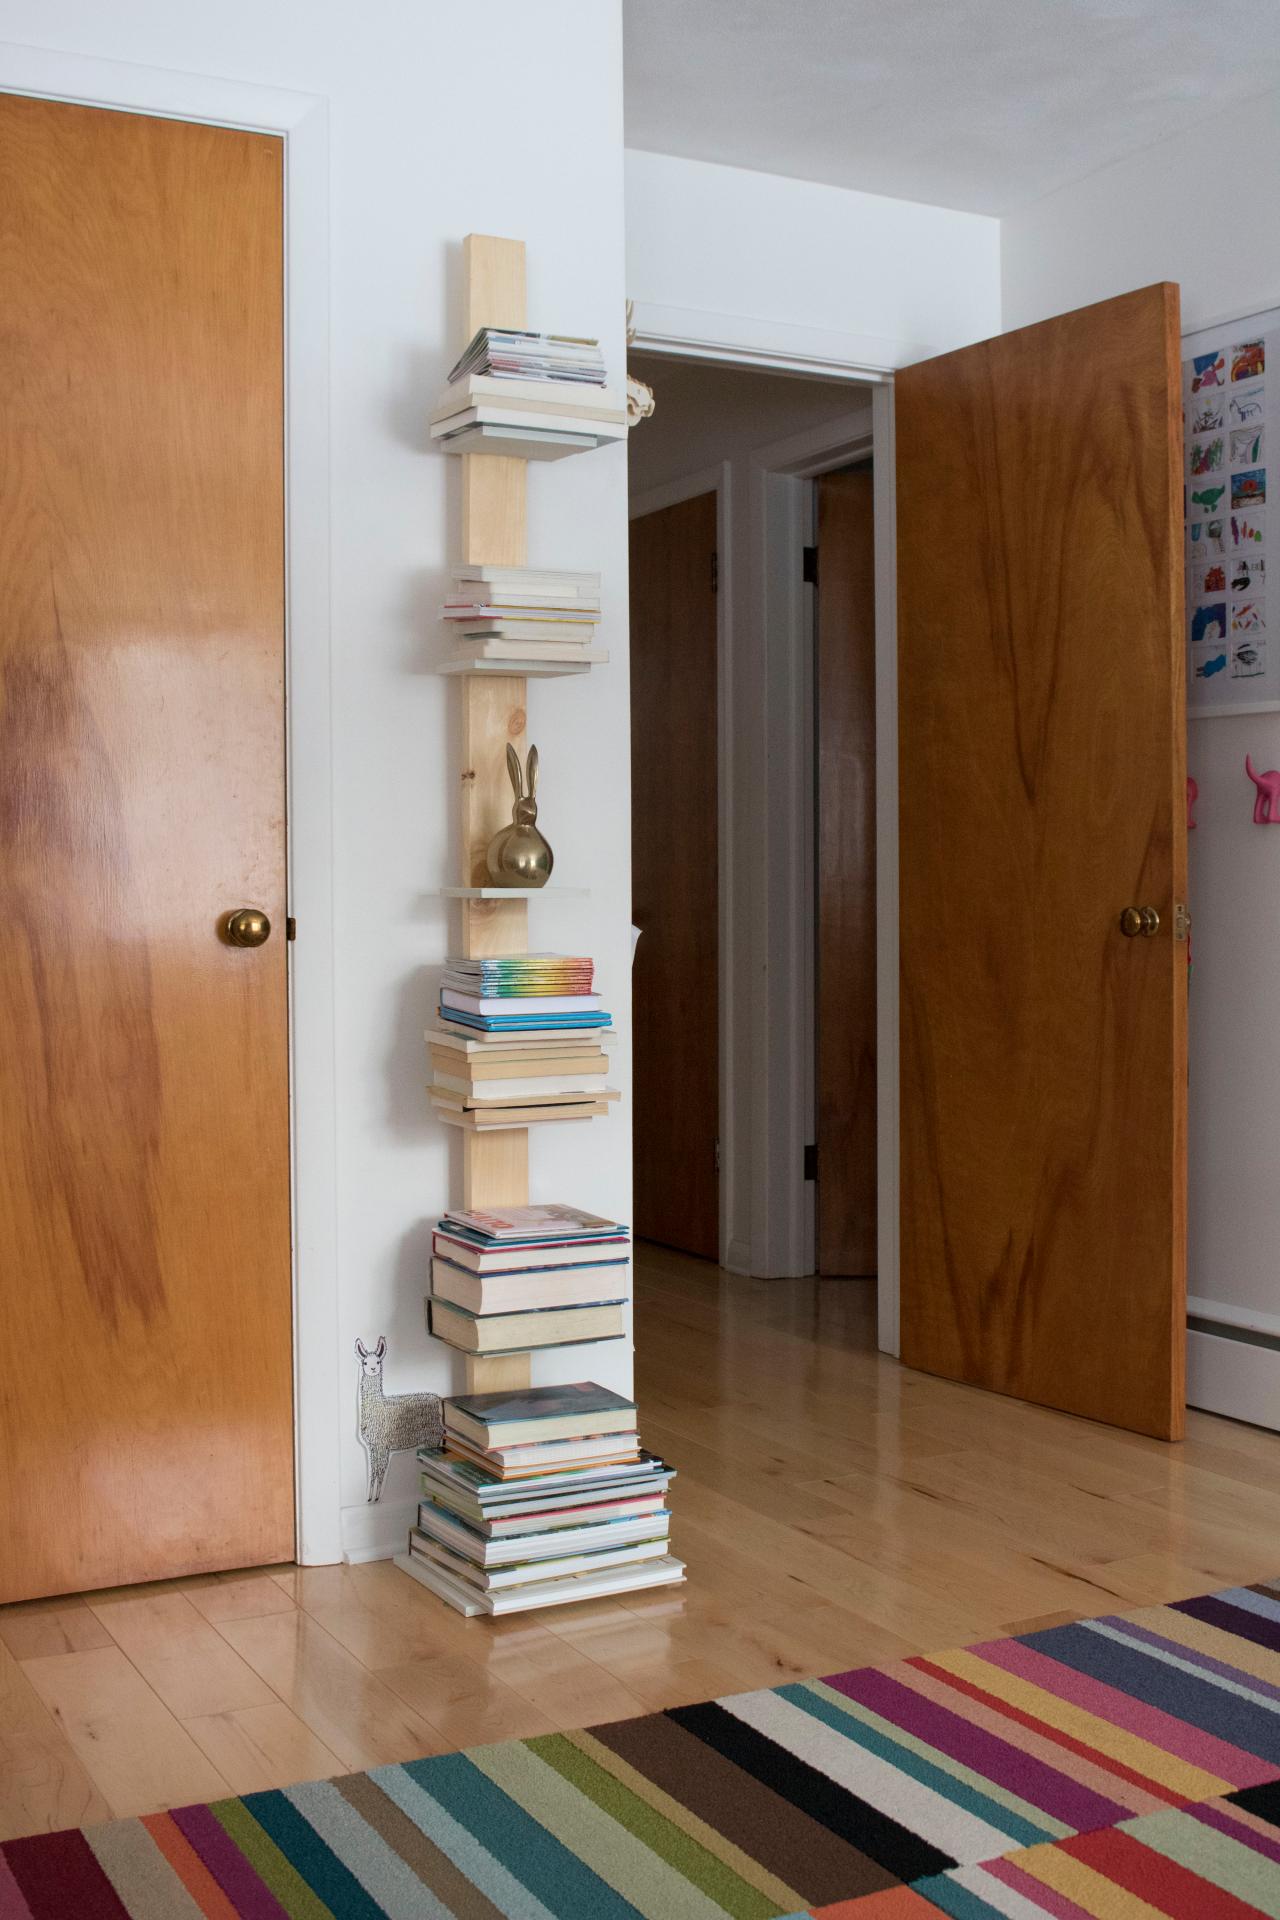 How to Build a Vertical Book Tower how-tos DIY